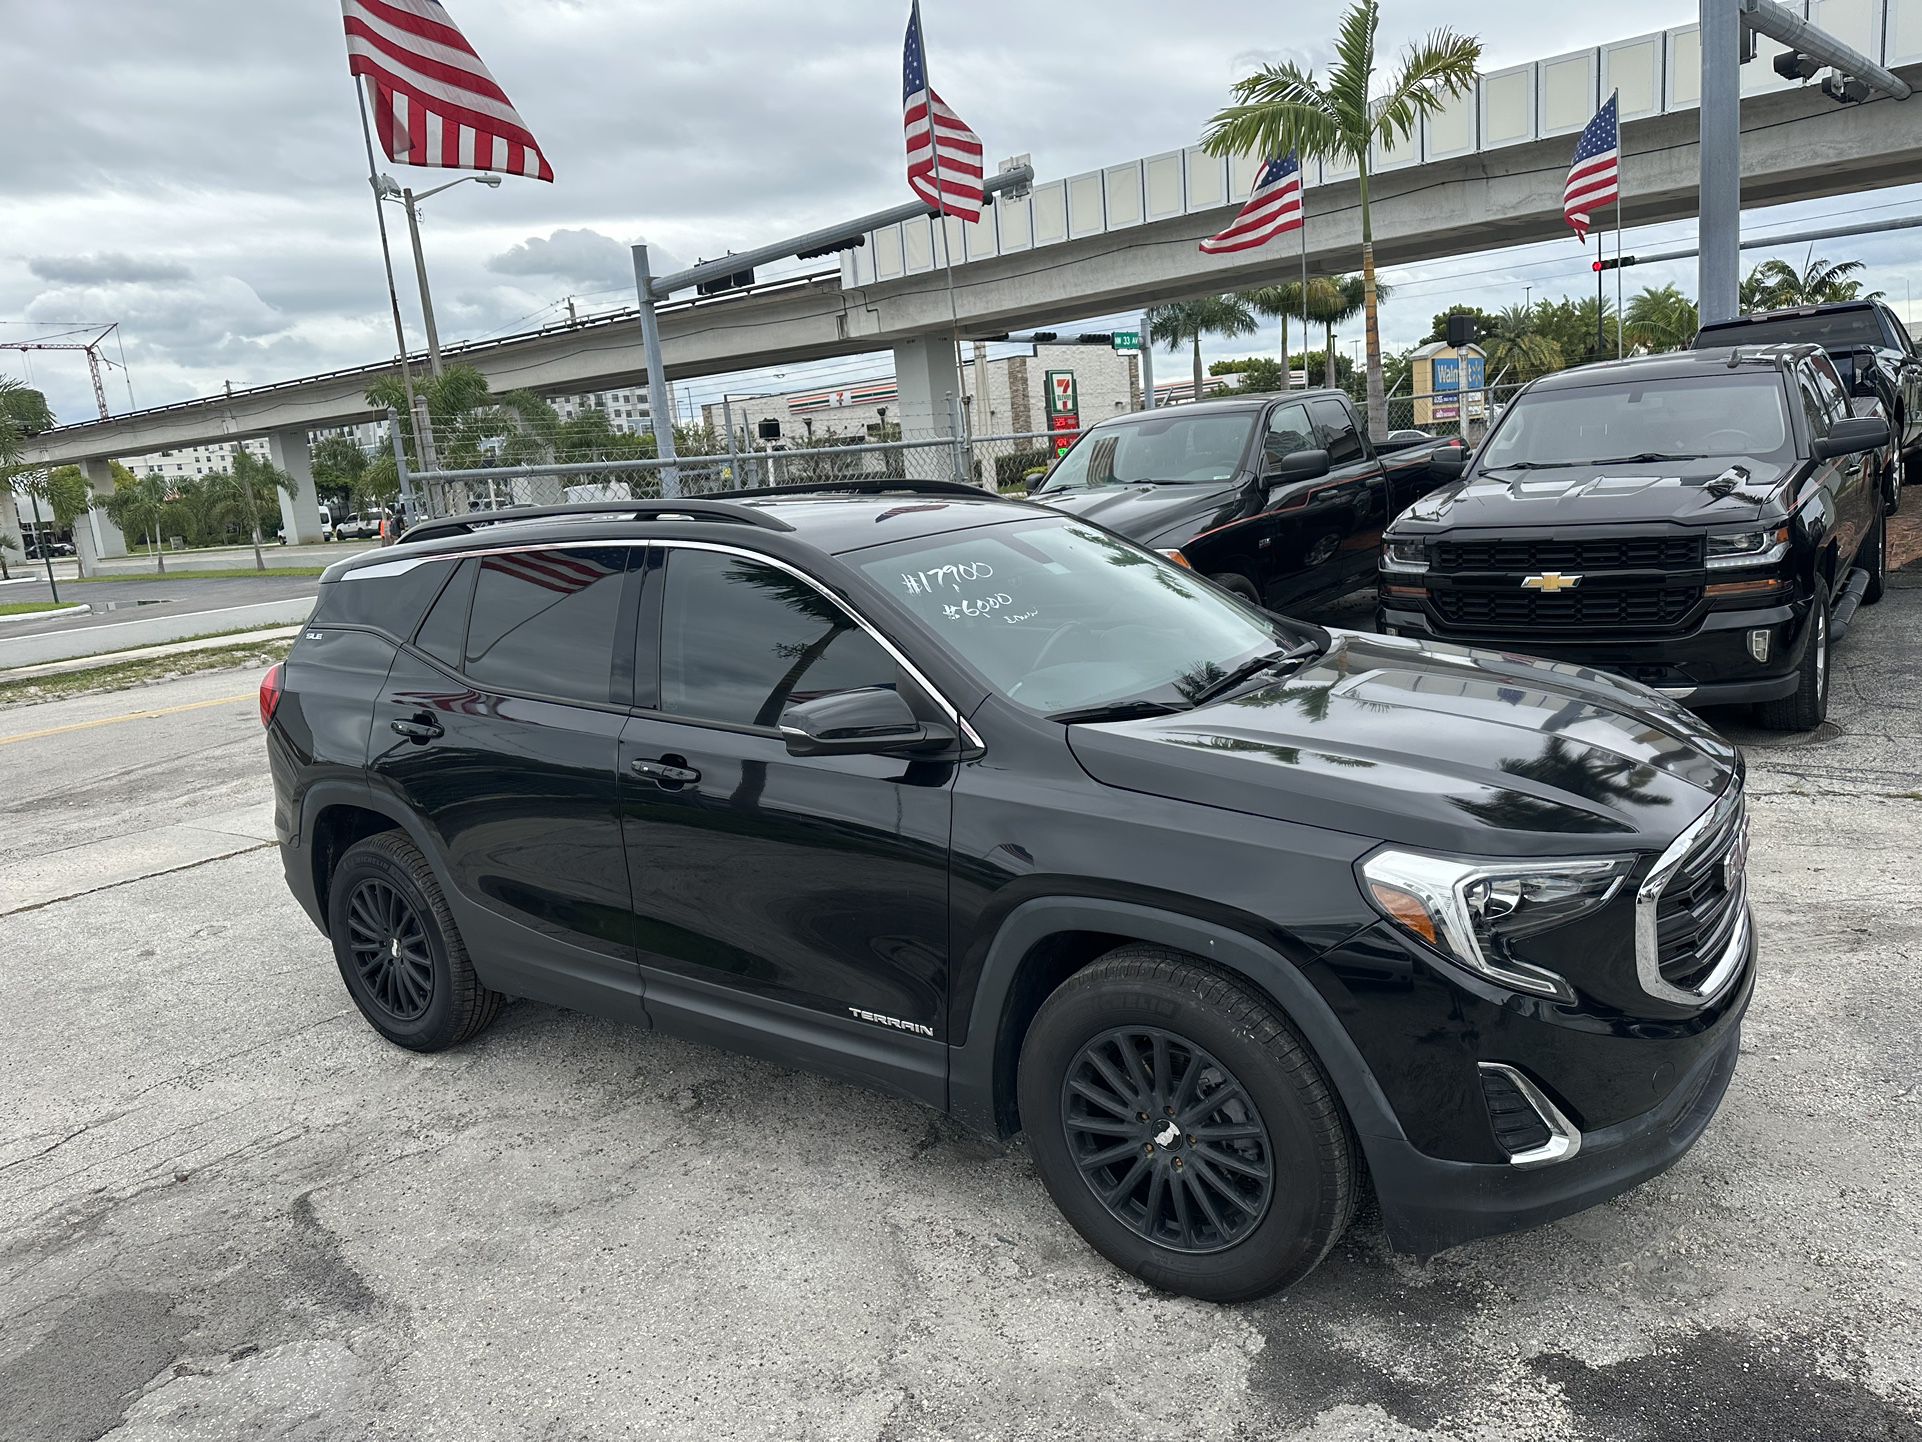 used 2019 gmc terrain - front view 2